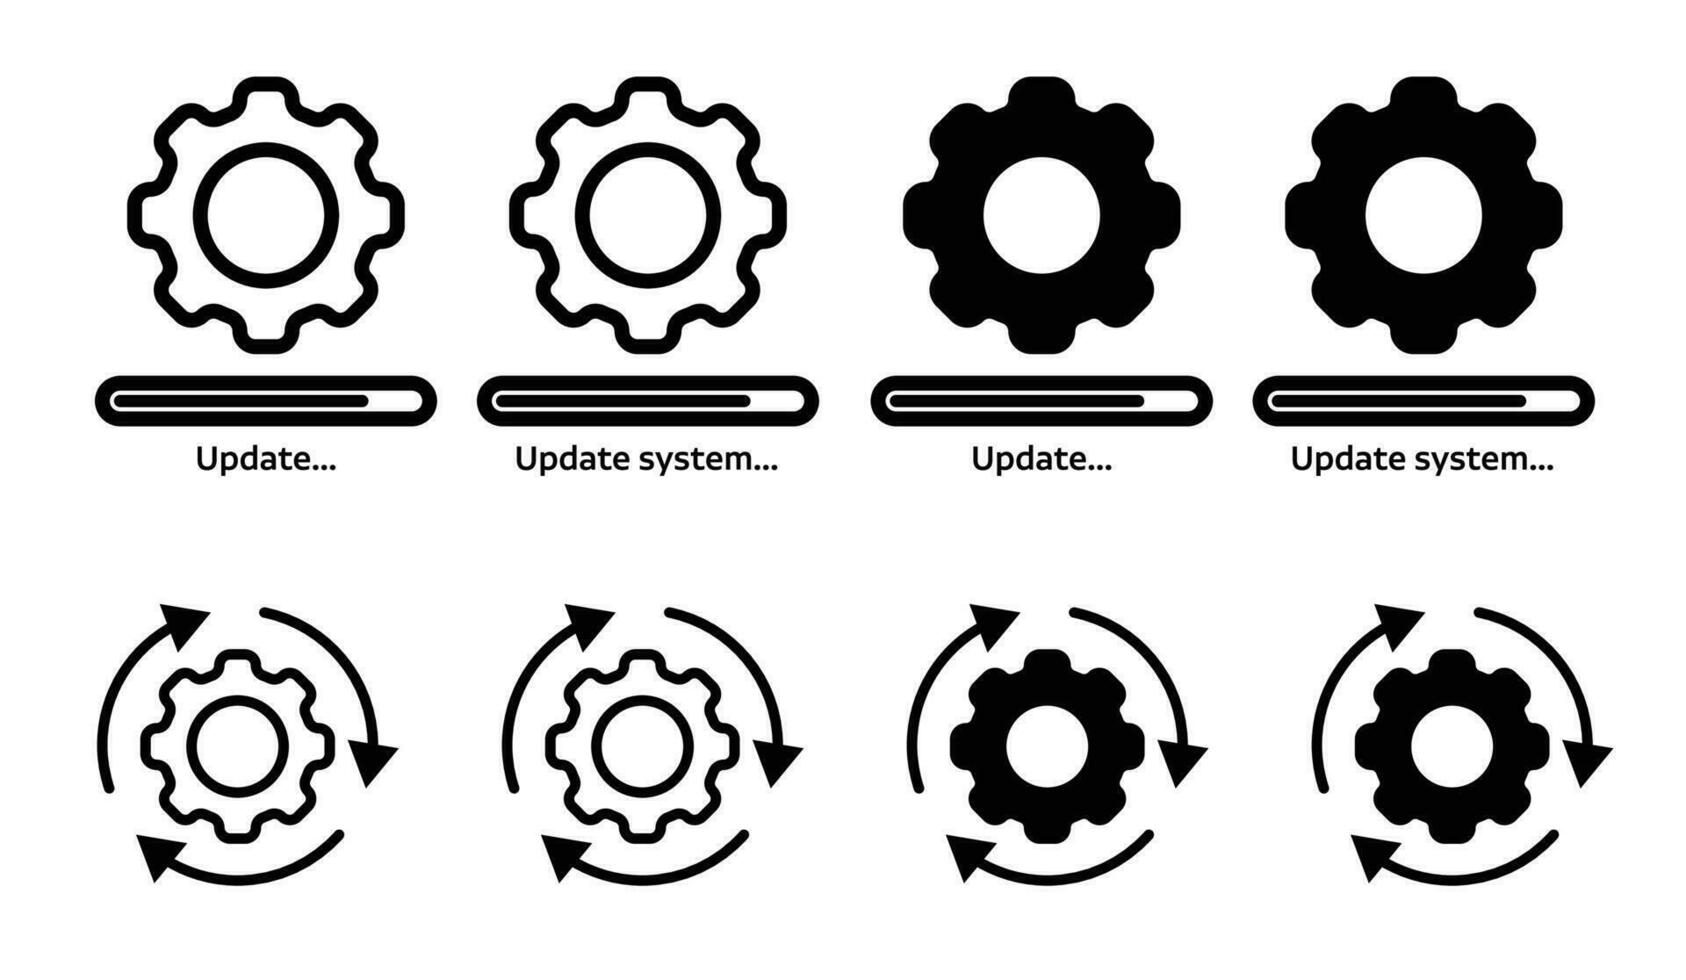 System update icon set. System operations icon set with gear sign. Work progress status pictogram vector. Os software maintenance symbol vector